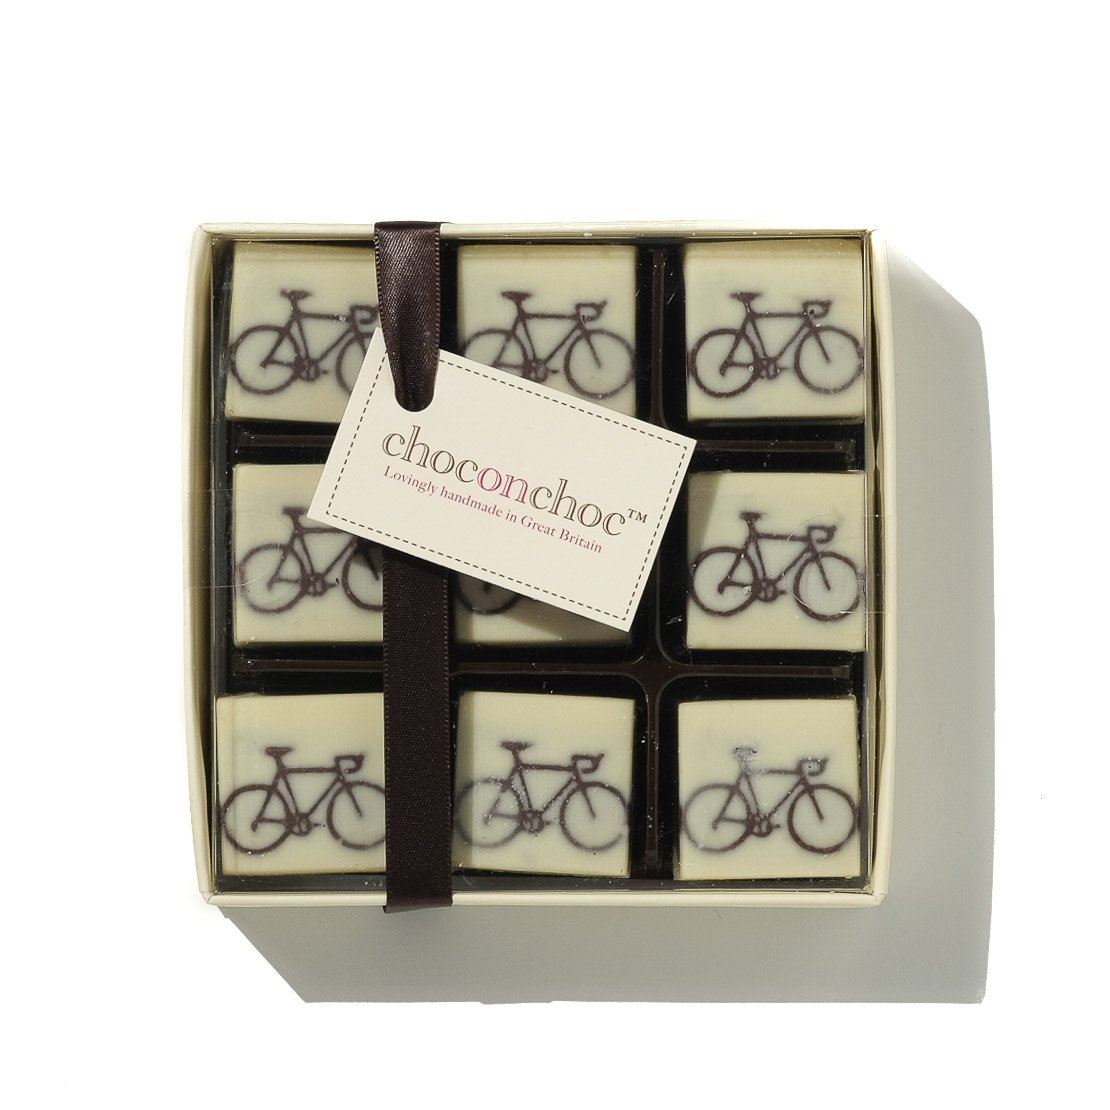 Chocolate Bicycles